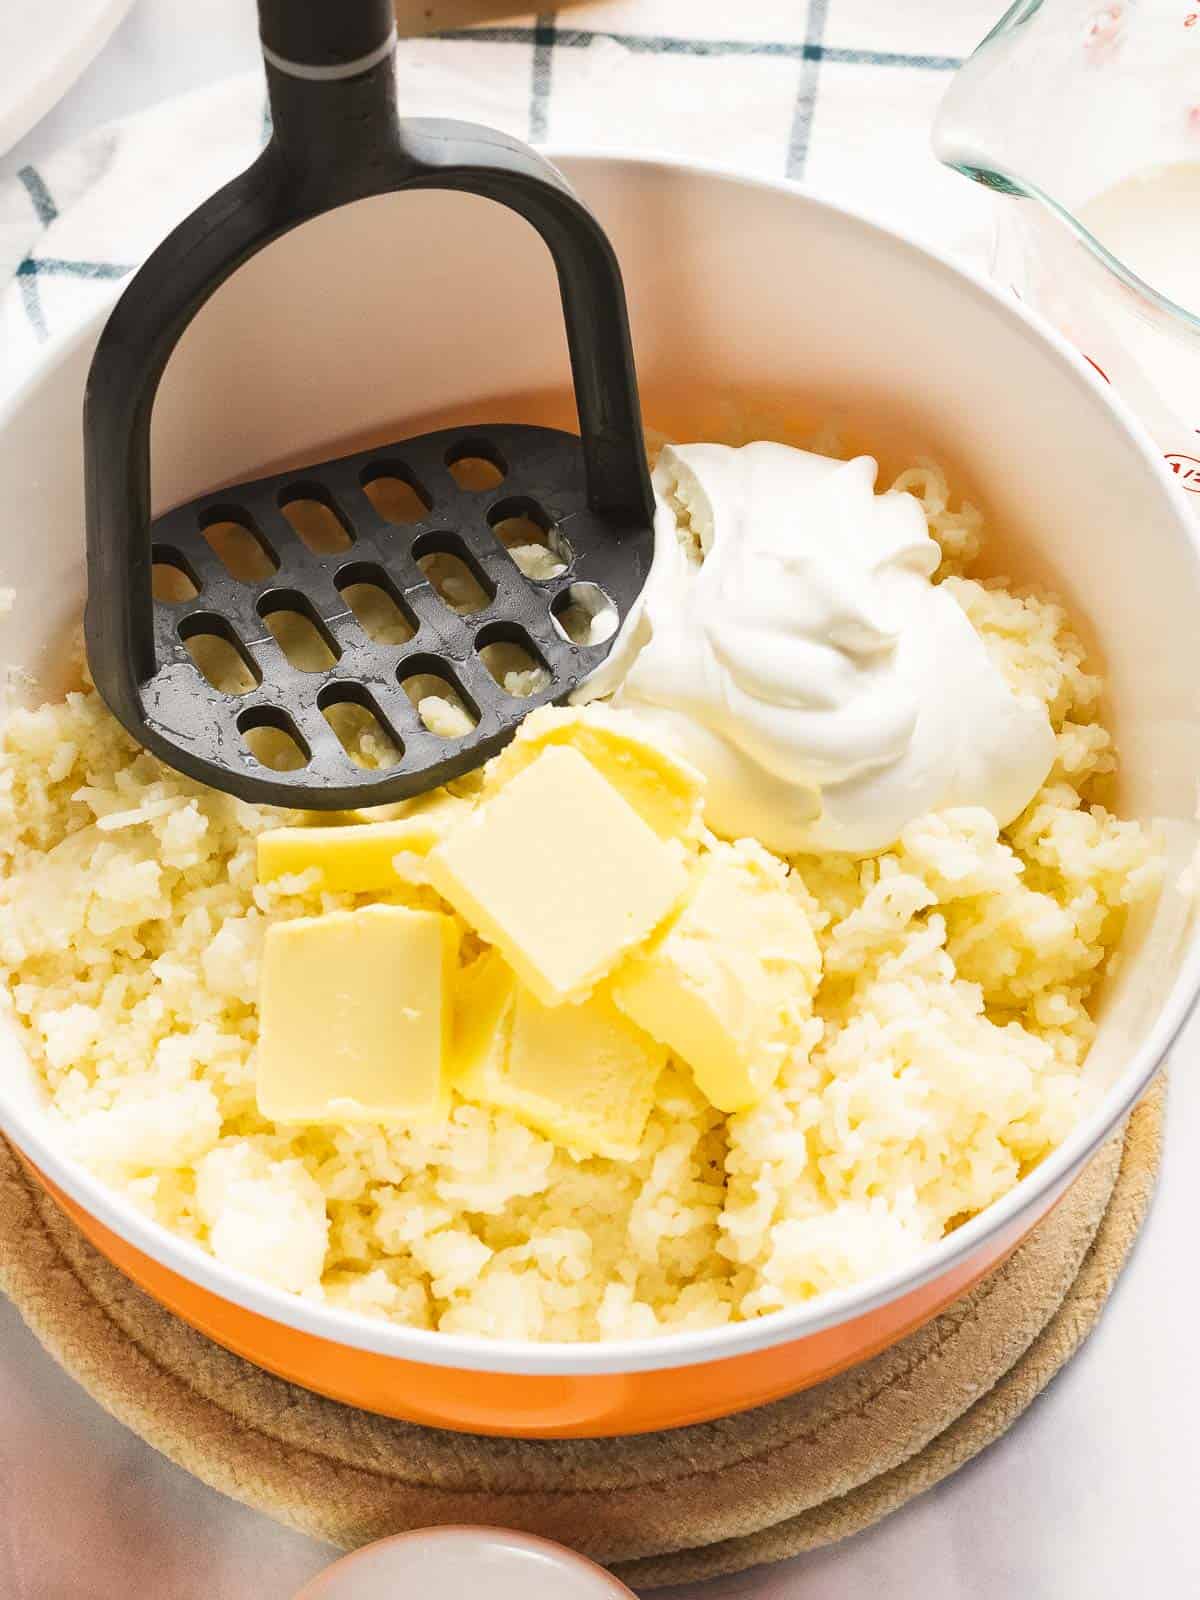 Yukon gold mashed potatoes with sour cream and butter being mashed with a potato masher.